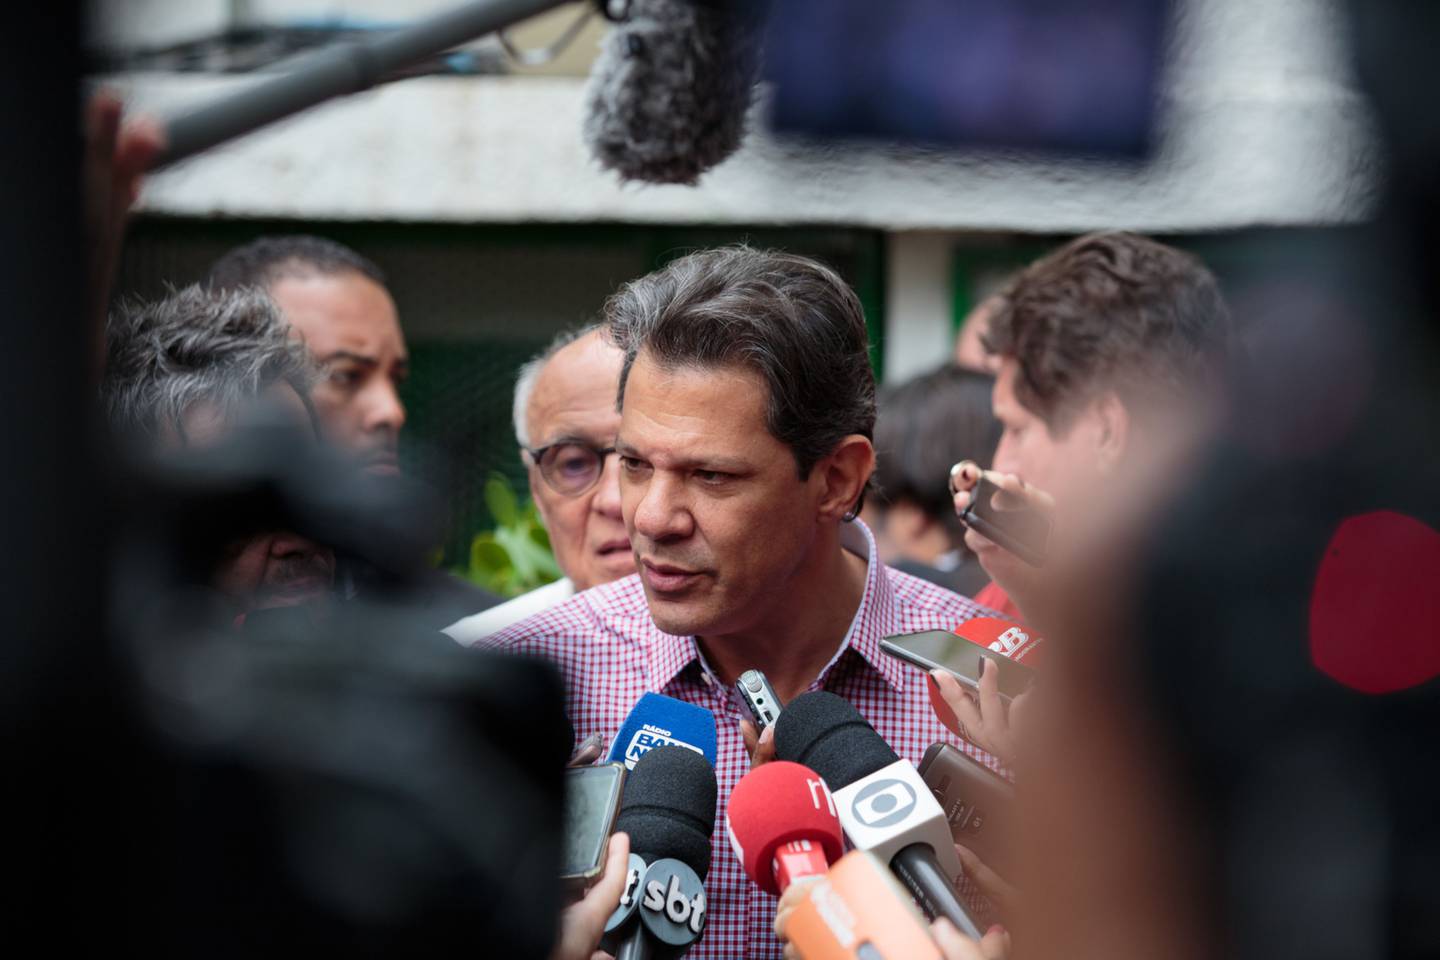 Haddad is a former mayor of São Paulo and a former education minister